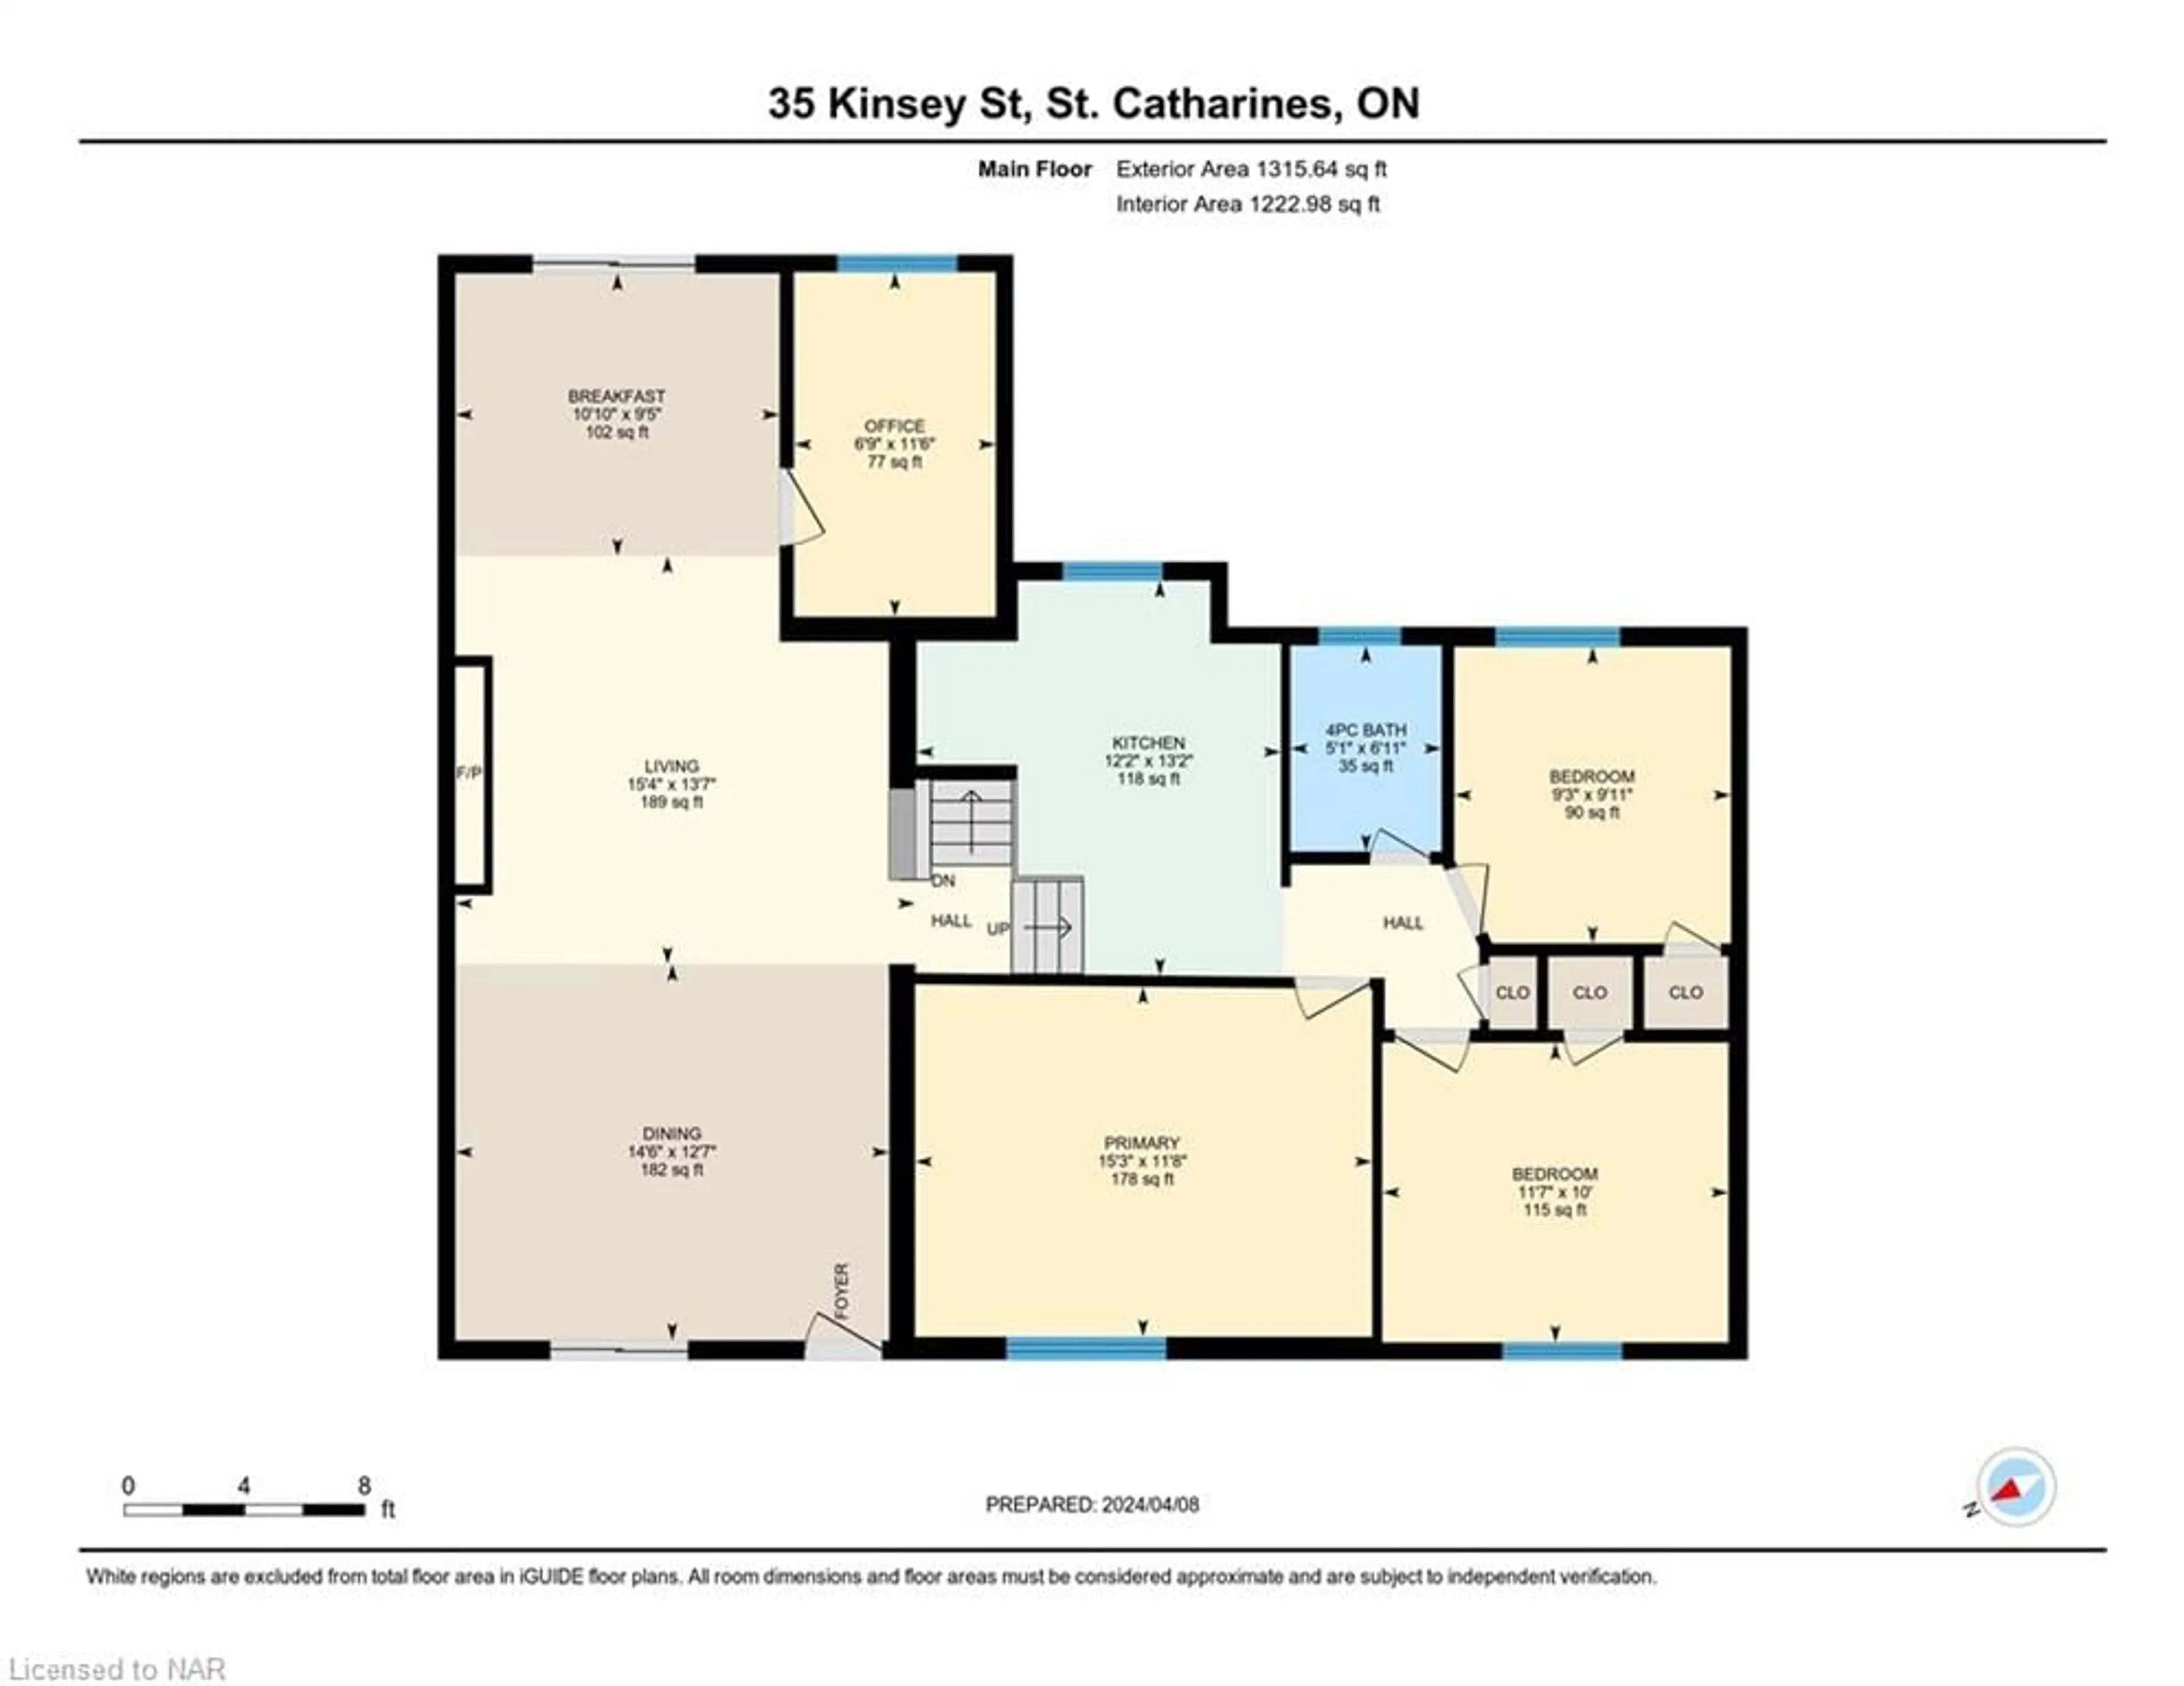 Floor plan for 35 Kinsey St, St. Catharines Ontario L2S 1C9